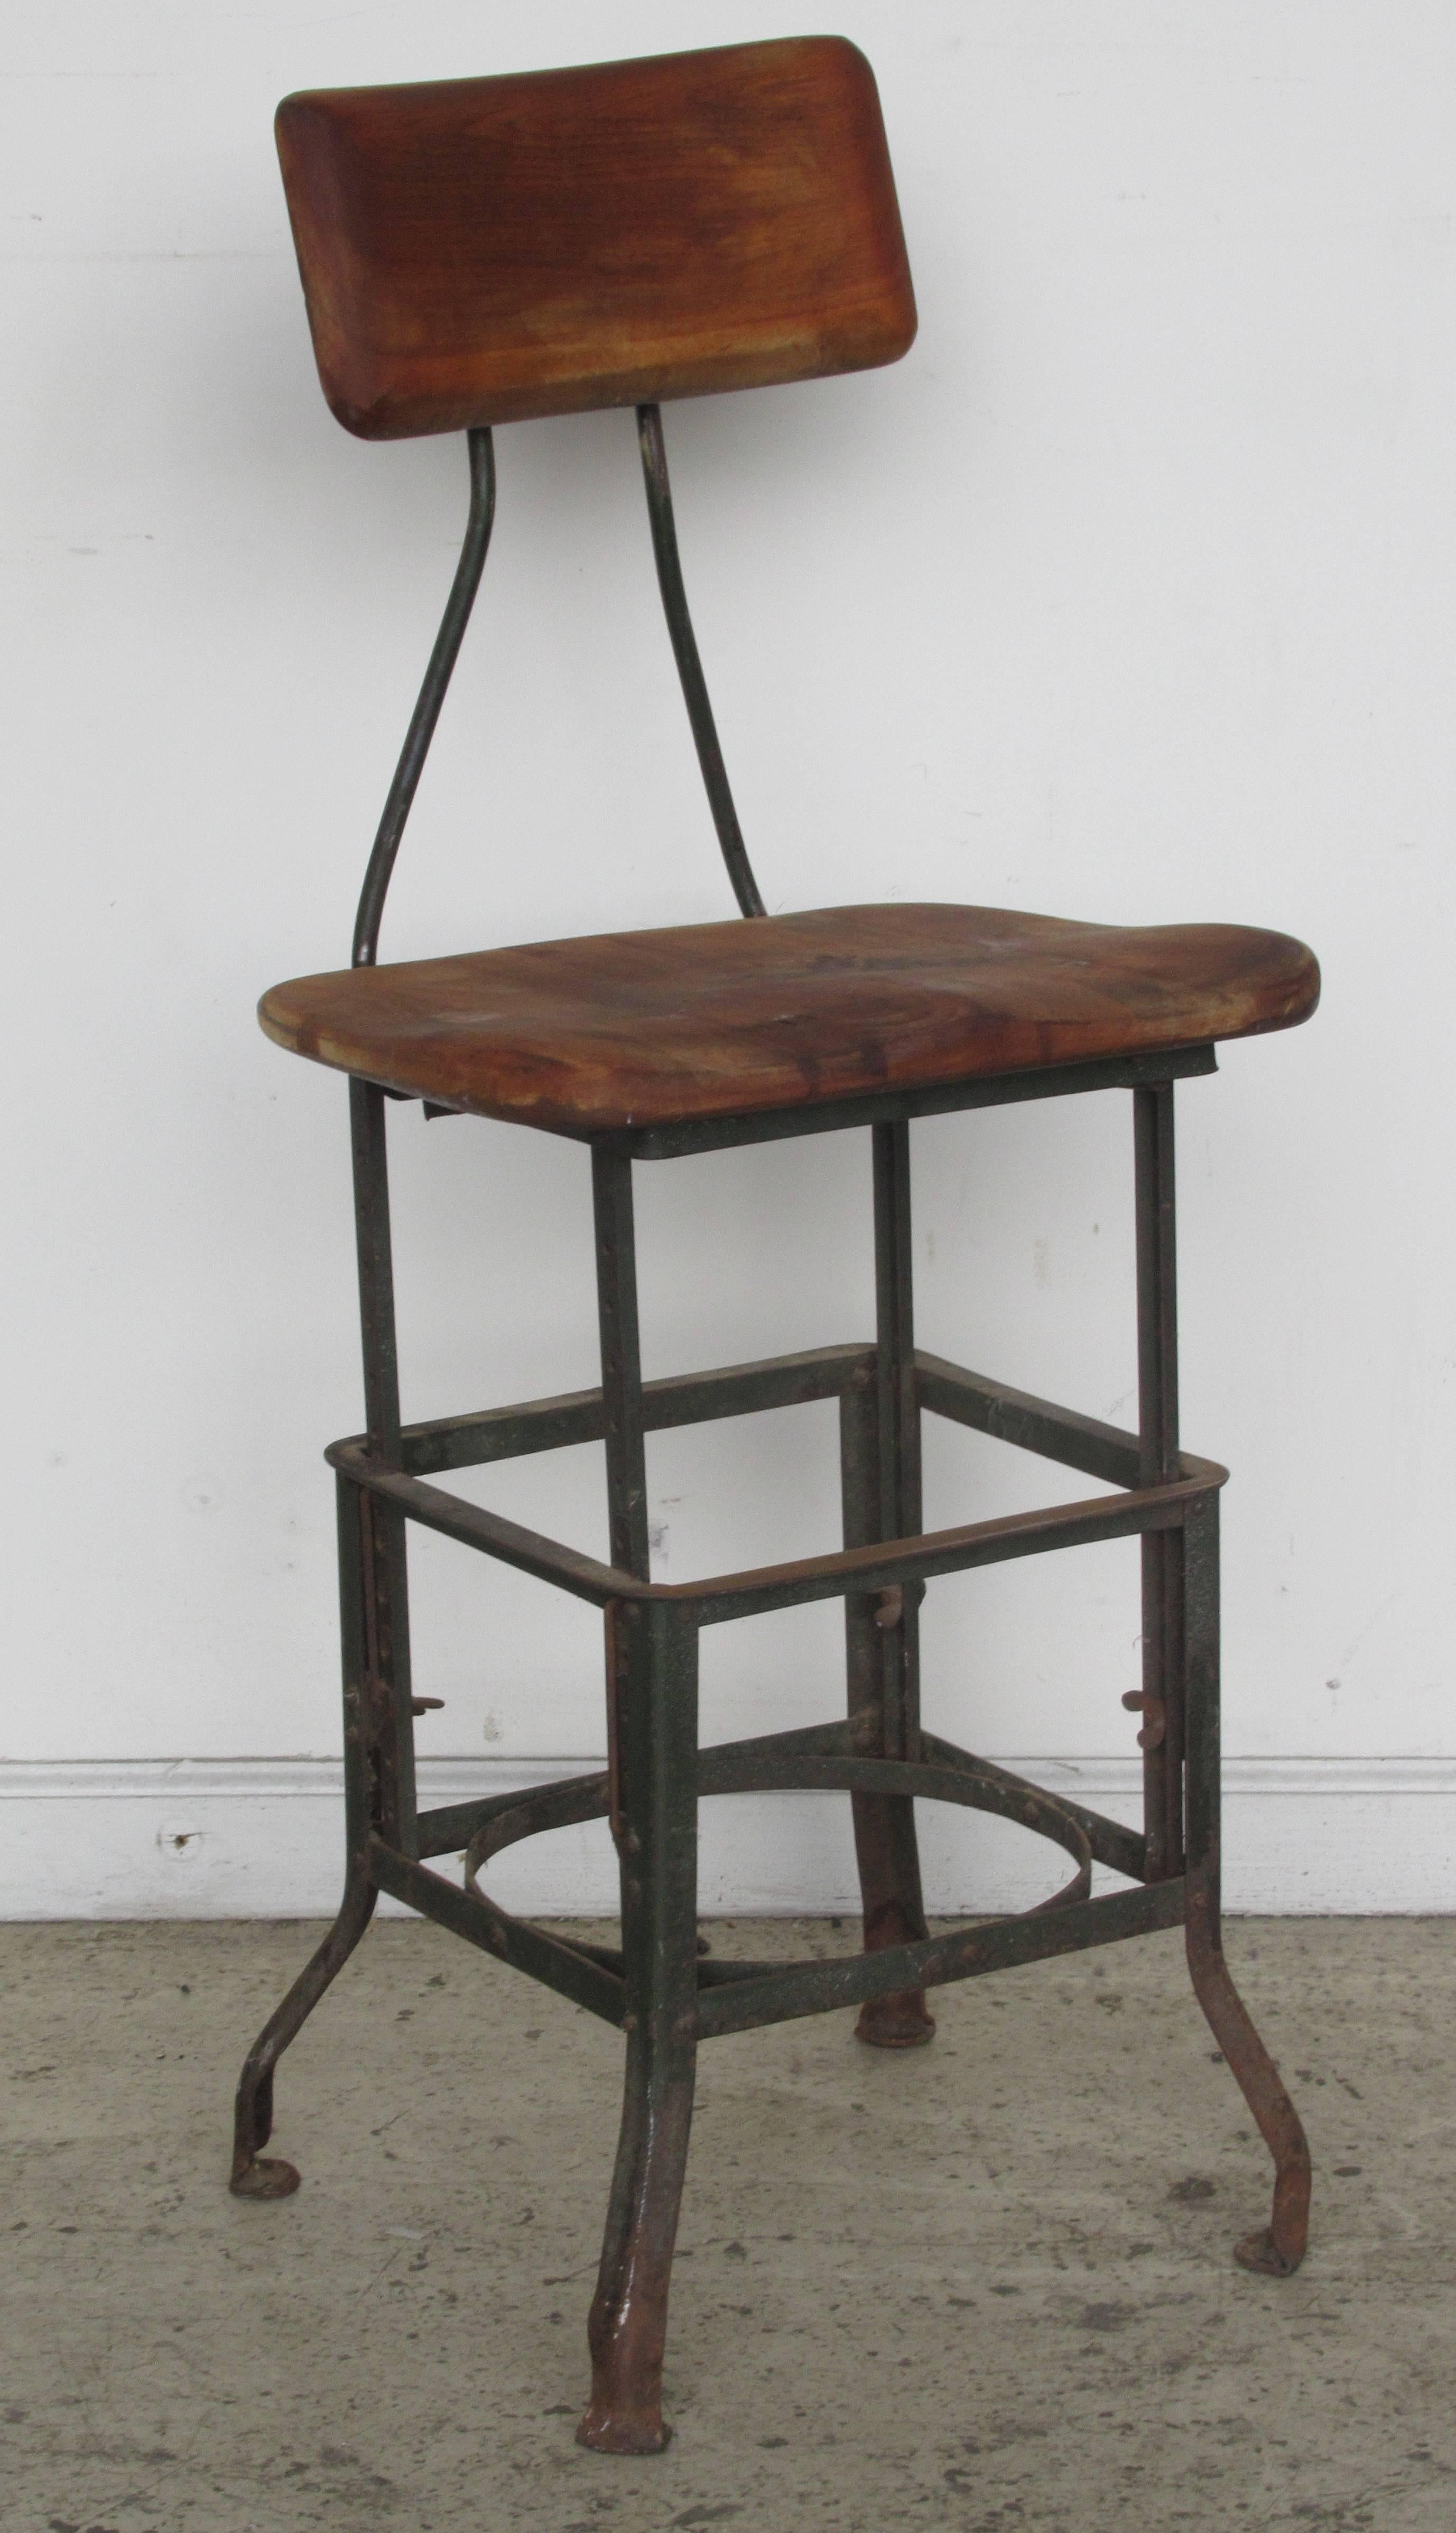 Early antique industrial task chair stool with adjustable height iron framework and solid contoured wood   seat and backrest. American - circa 1920 - 1930